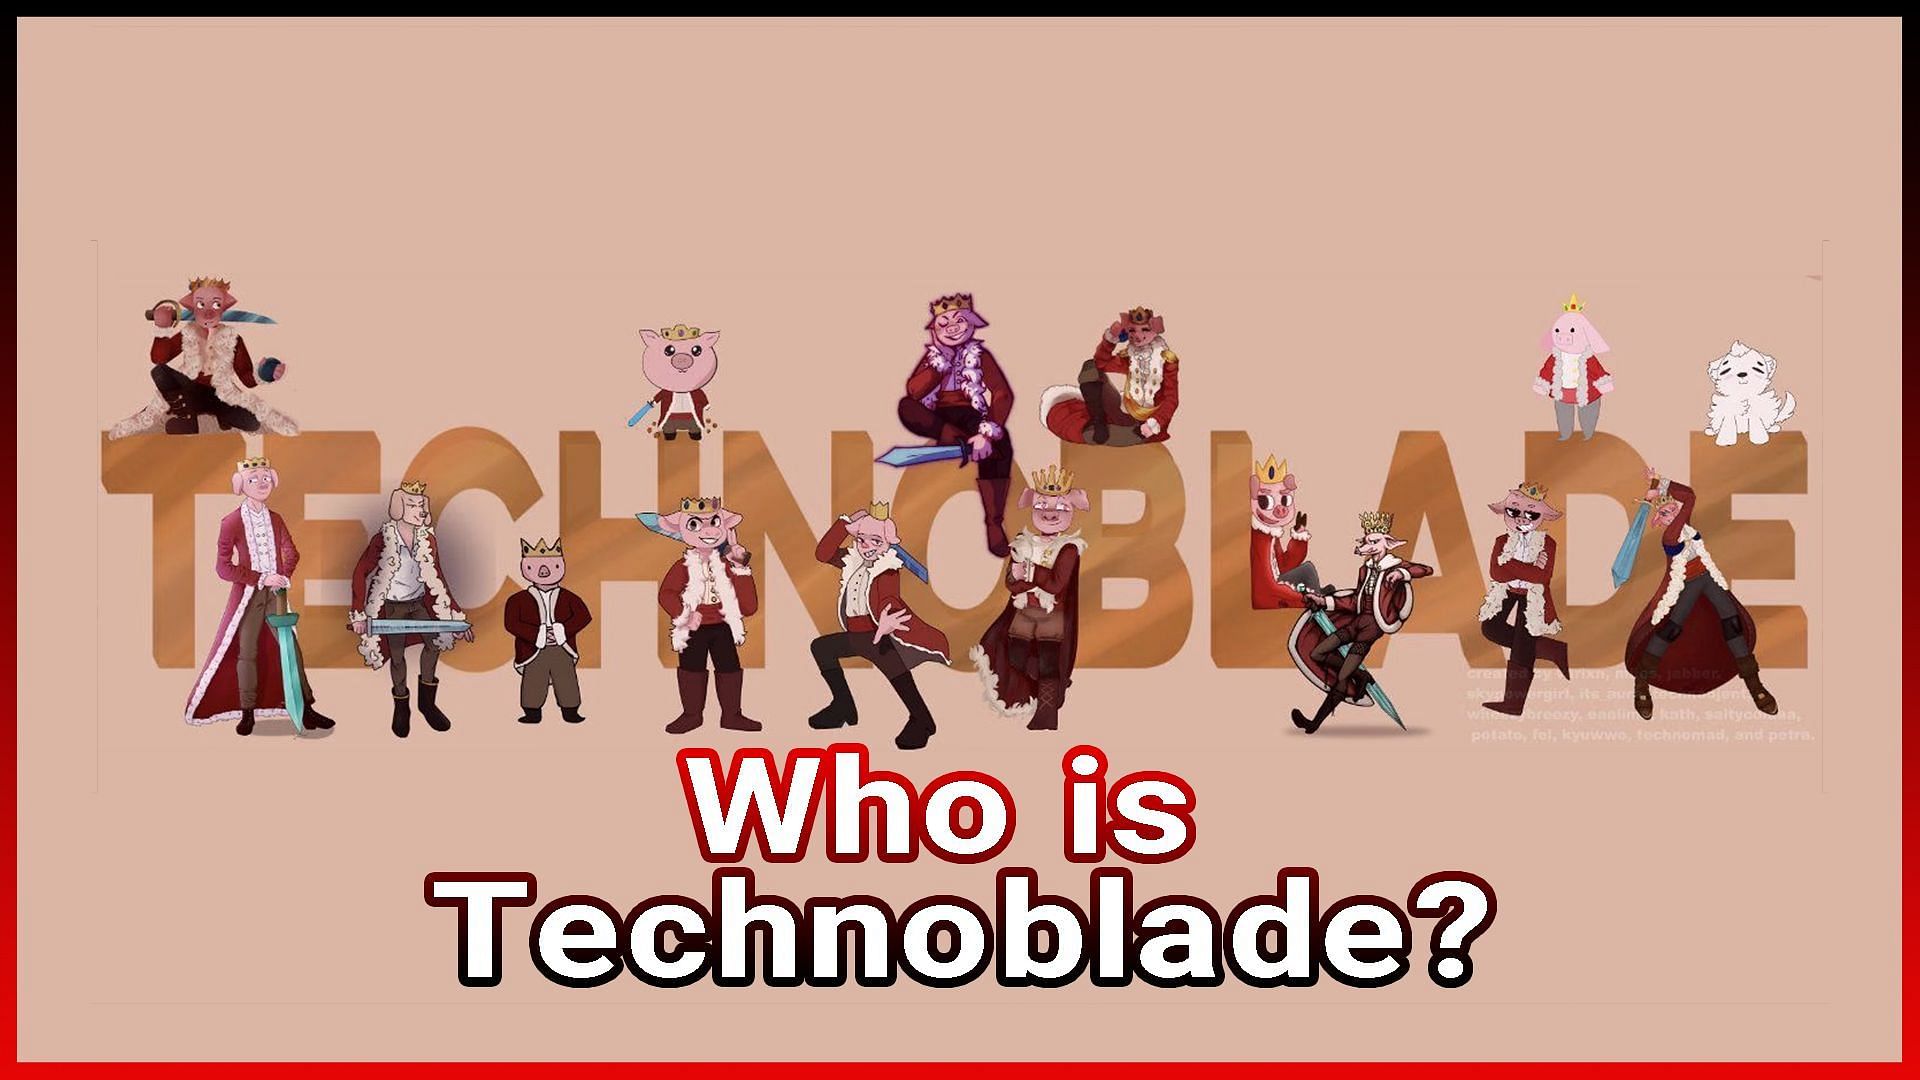 Technoblade Bio, Net Worth, Career, Personal Life and FAQs